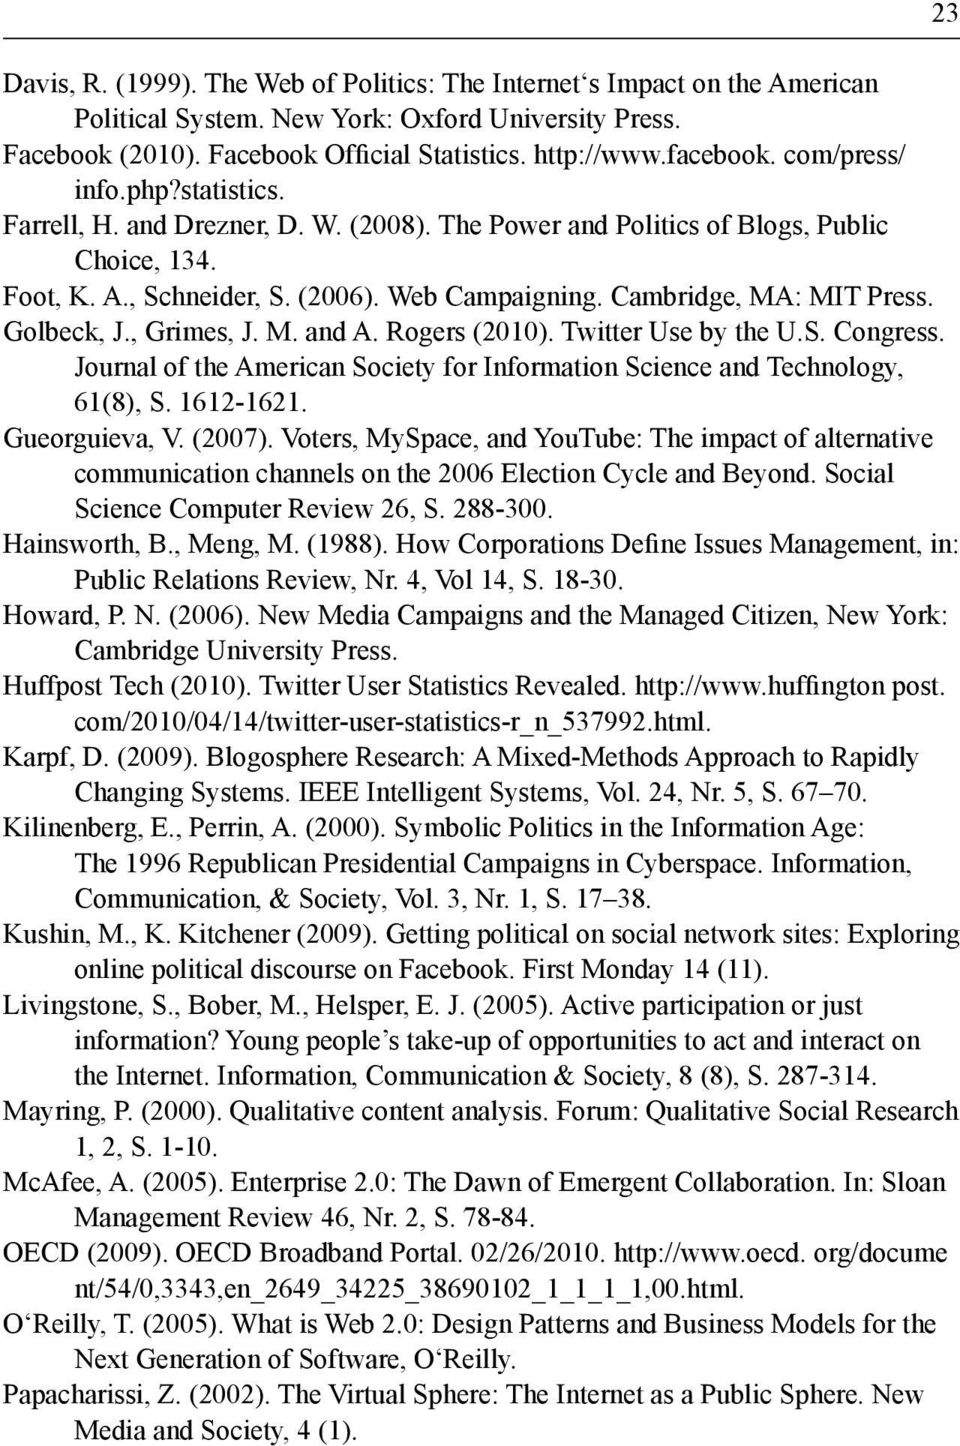 Cambridge, MA: MIT Press. Golbeck, J., Grimes, J. M. and A. Rogers (2010). Twitter Use by the U.S. Congress. Journal of the American Society for Information Science and Technology, 61(8), S.